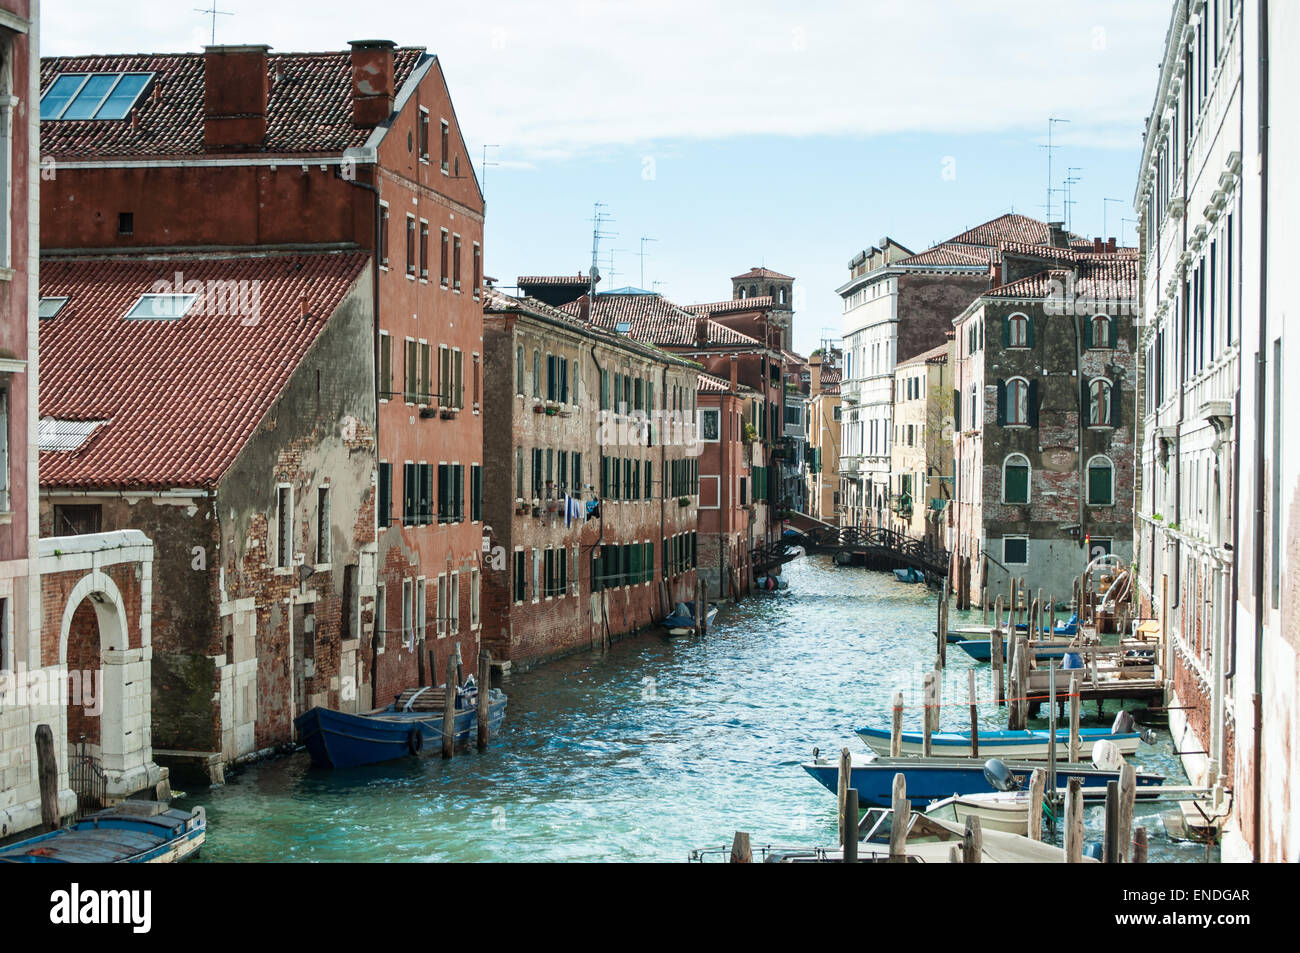 Typical canal with boats as local transportation in Venice, Italy Stock Photo